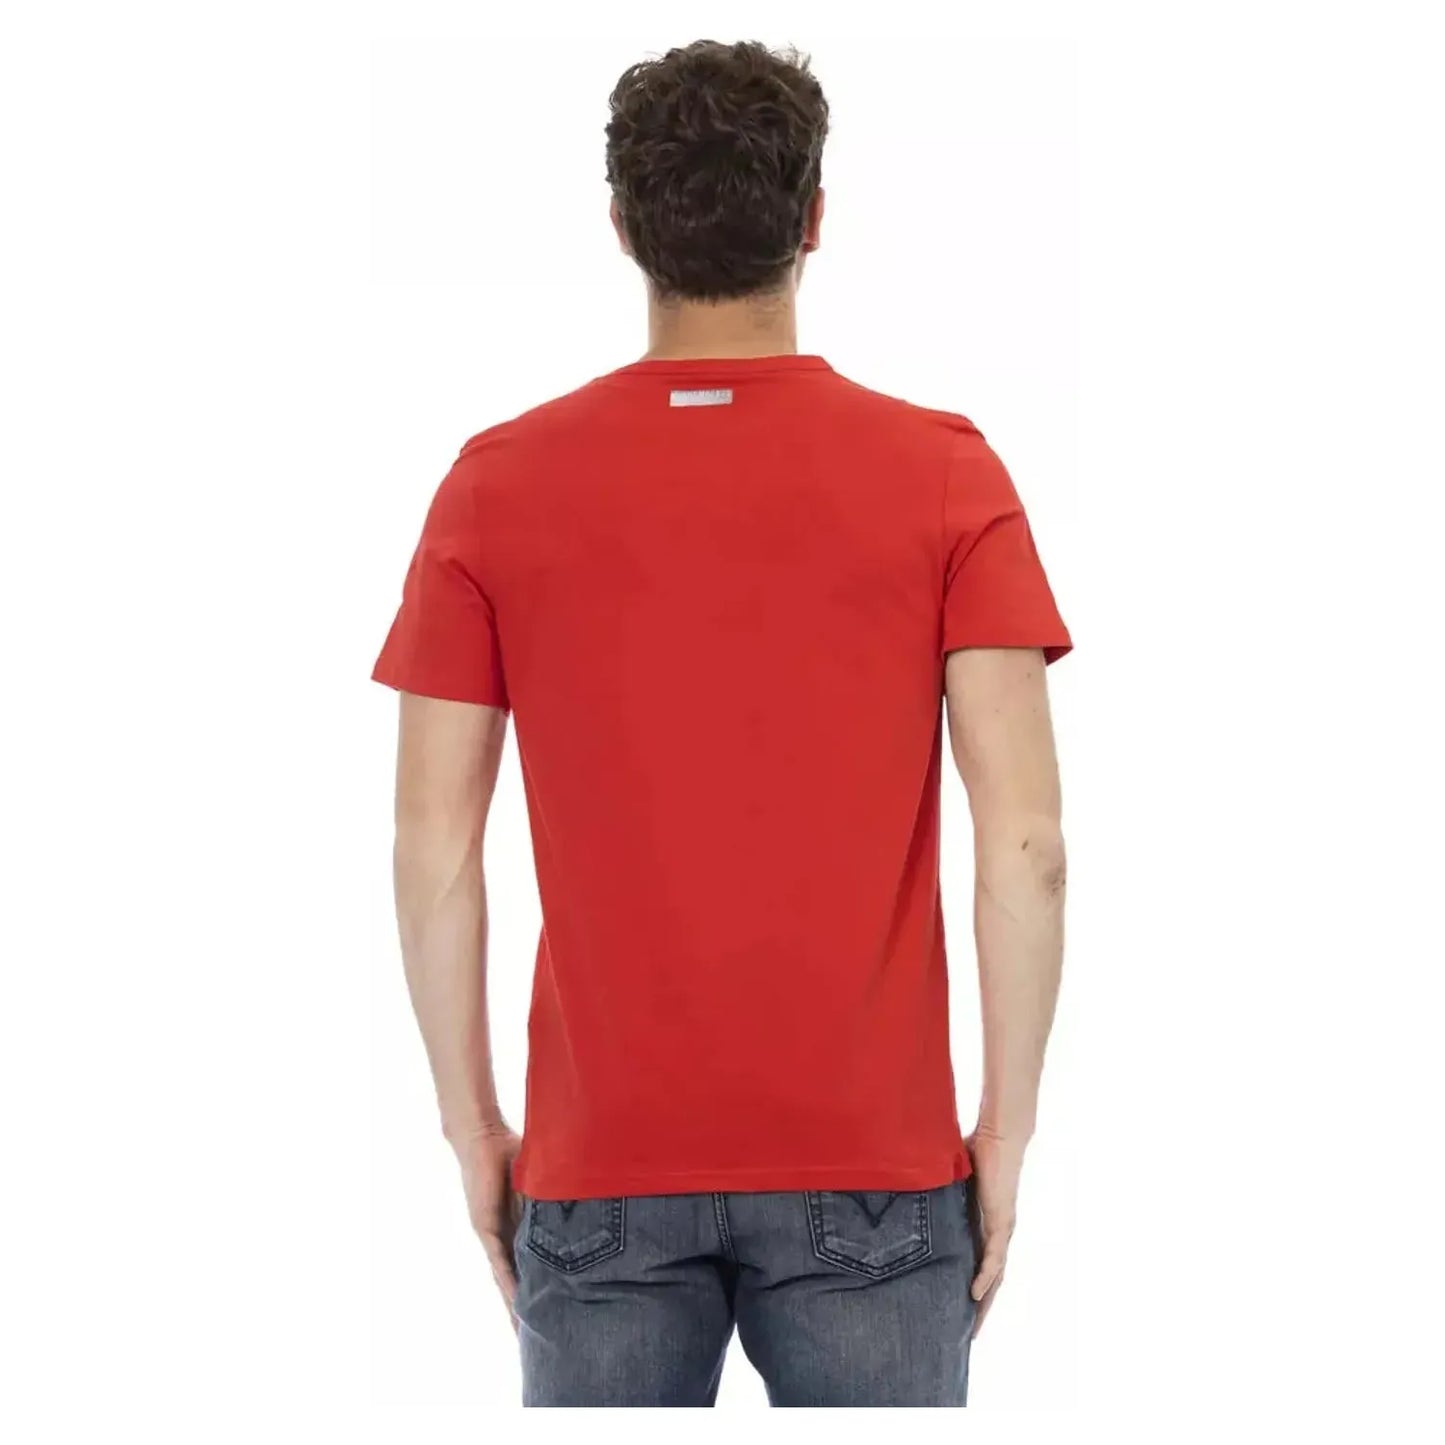 Bikkembergs Vibrant Red Front Print Tee red-cotton-t-shirt-3